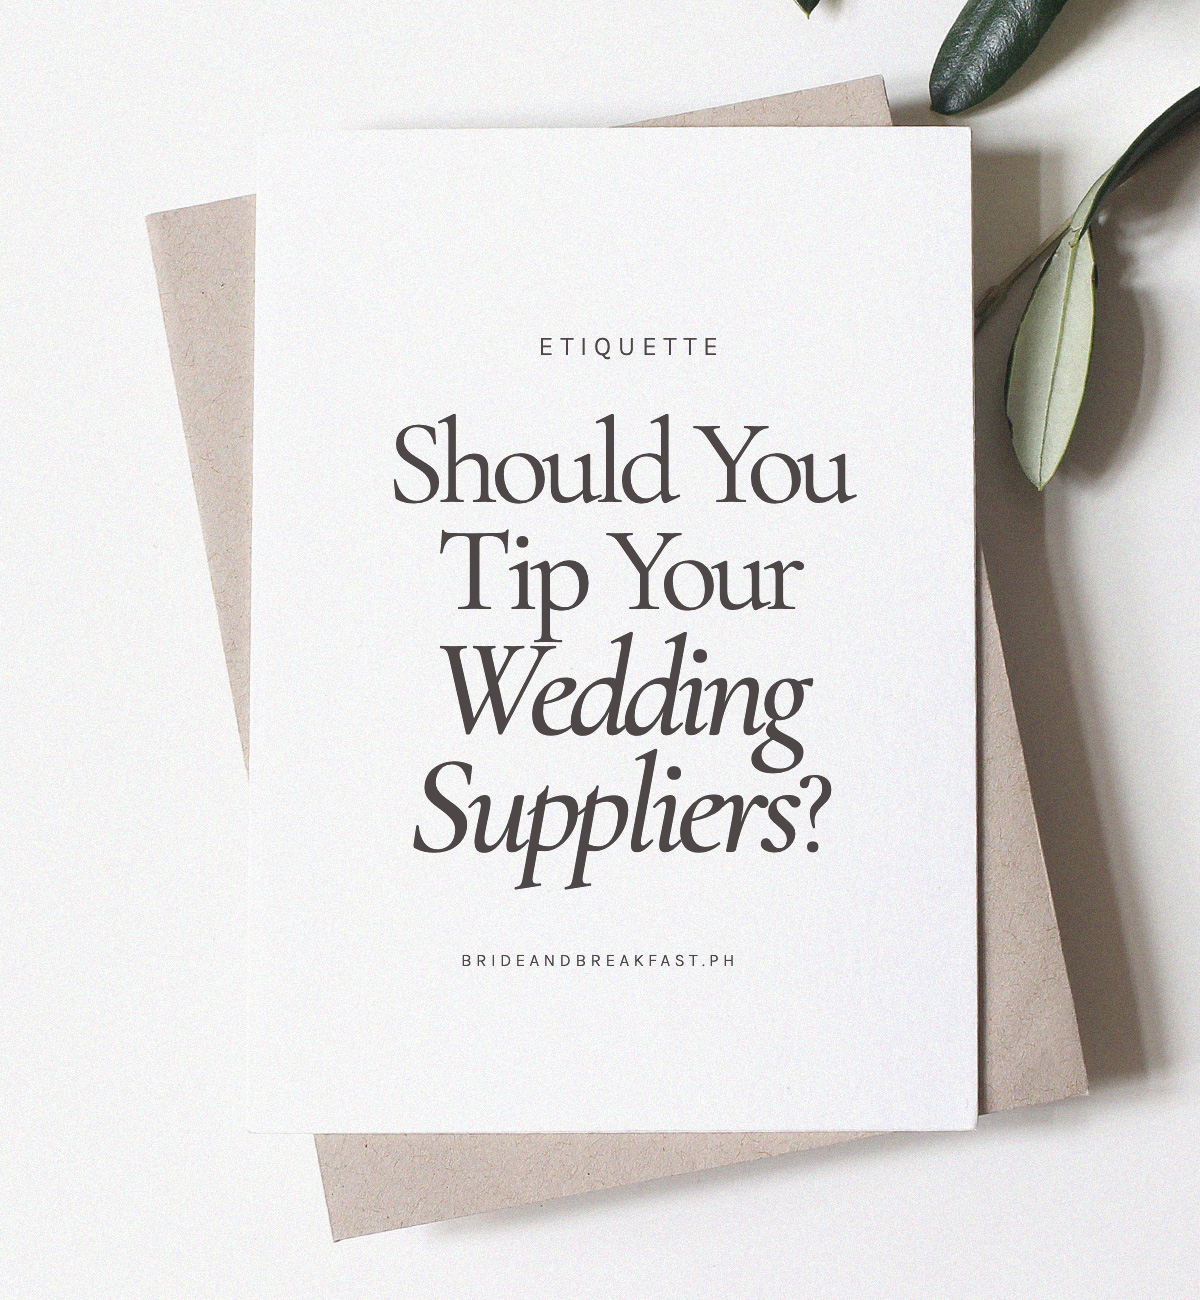 Should You Tip Your Wedding Suppliers?